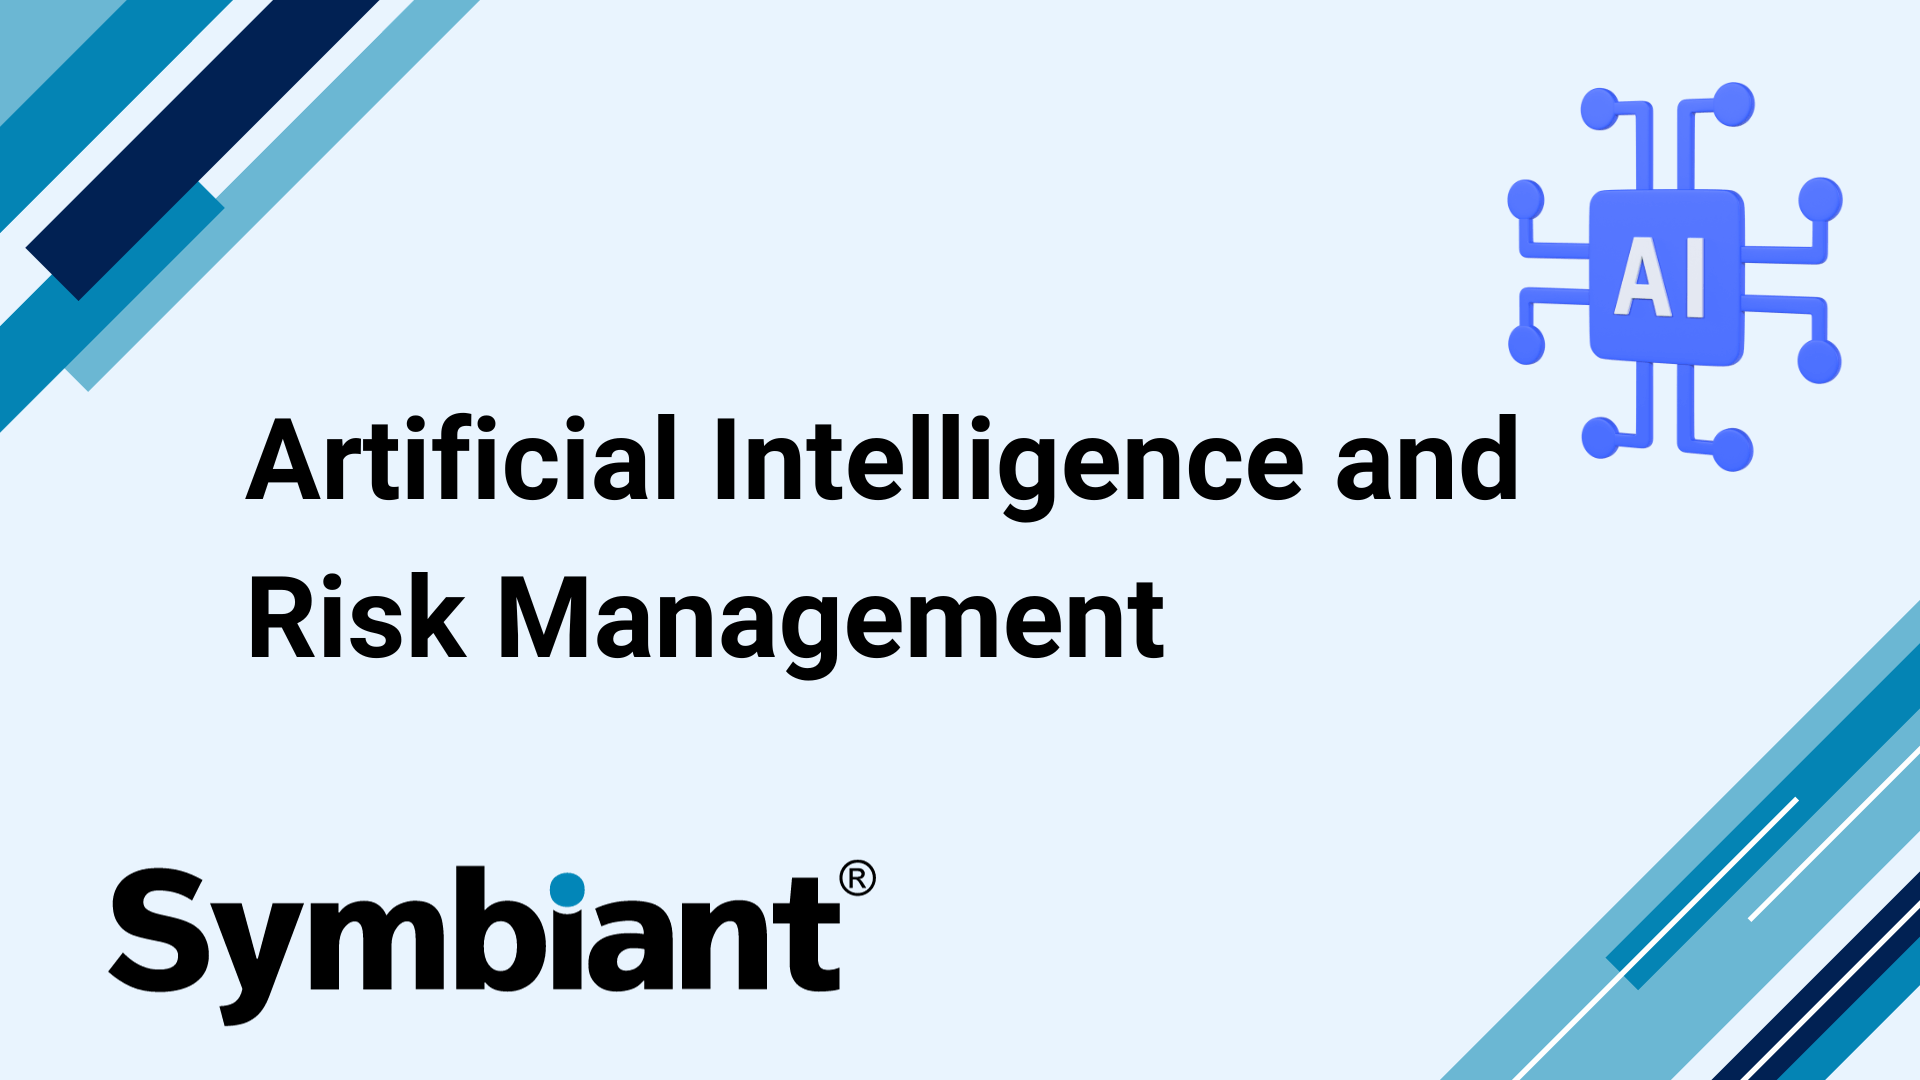 AI (Artificial Intelligence) and Risk Management